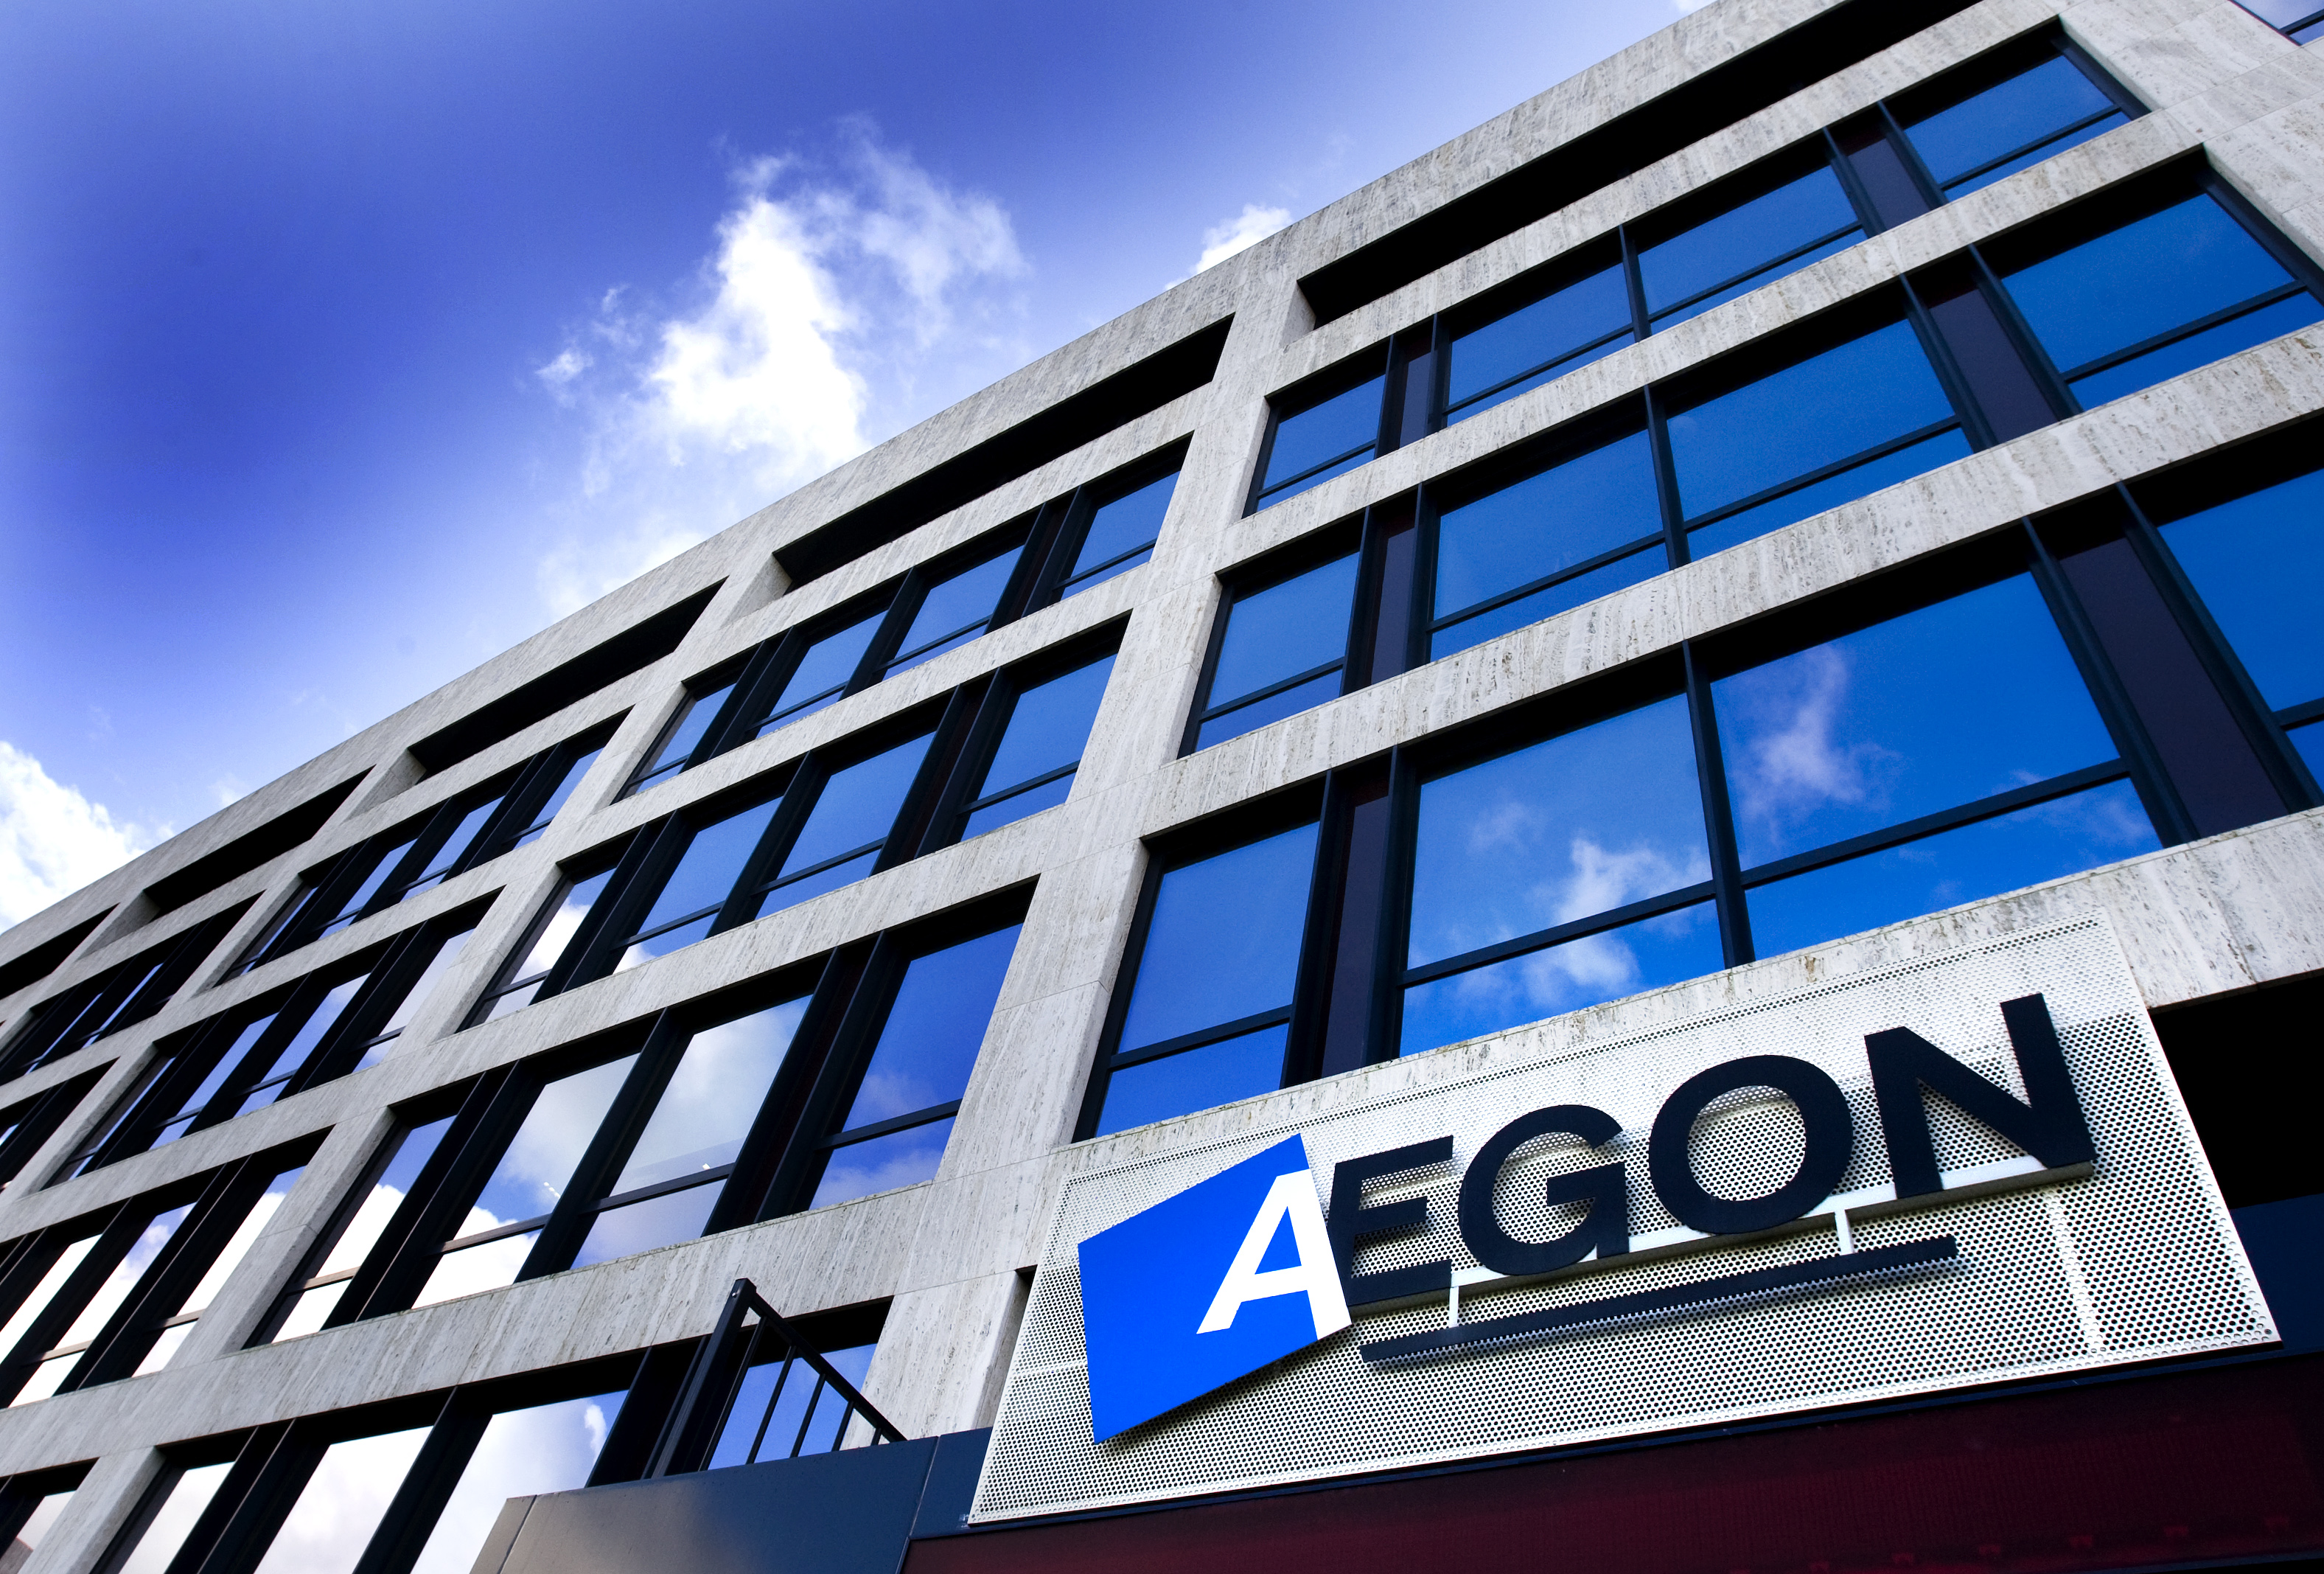 Aegon Reports Higher Earnings And Sales For Q4 2014